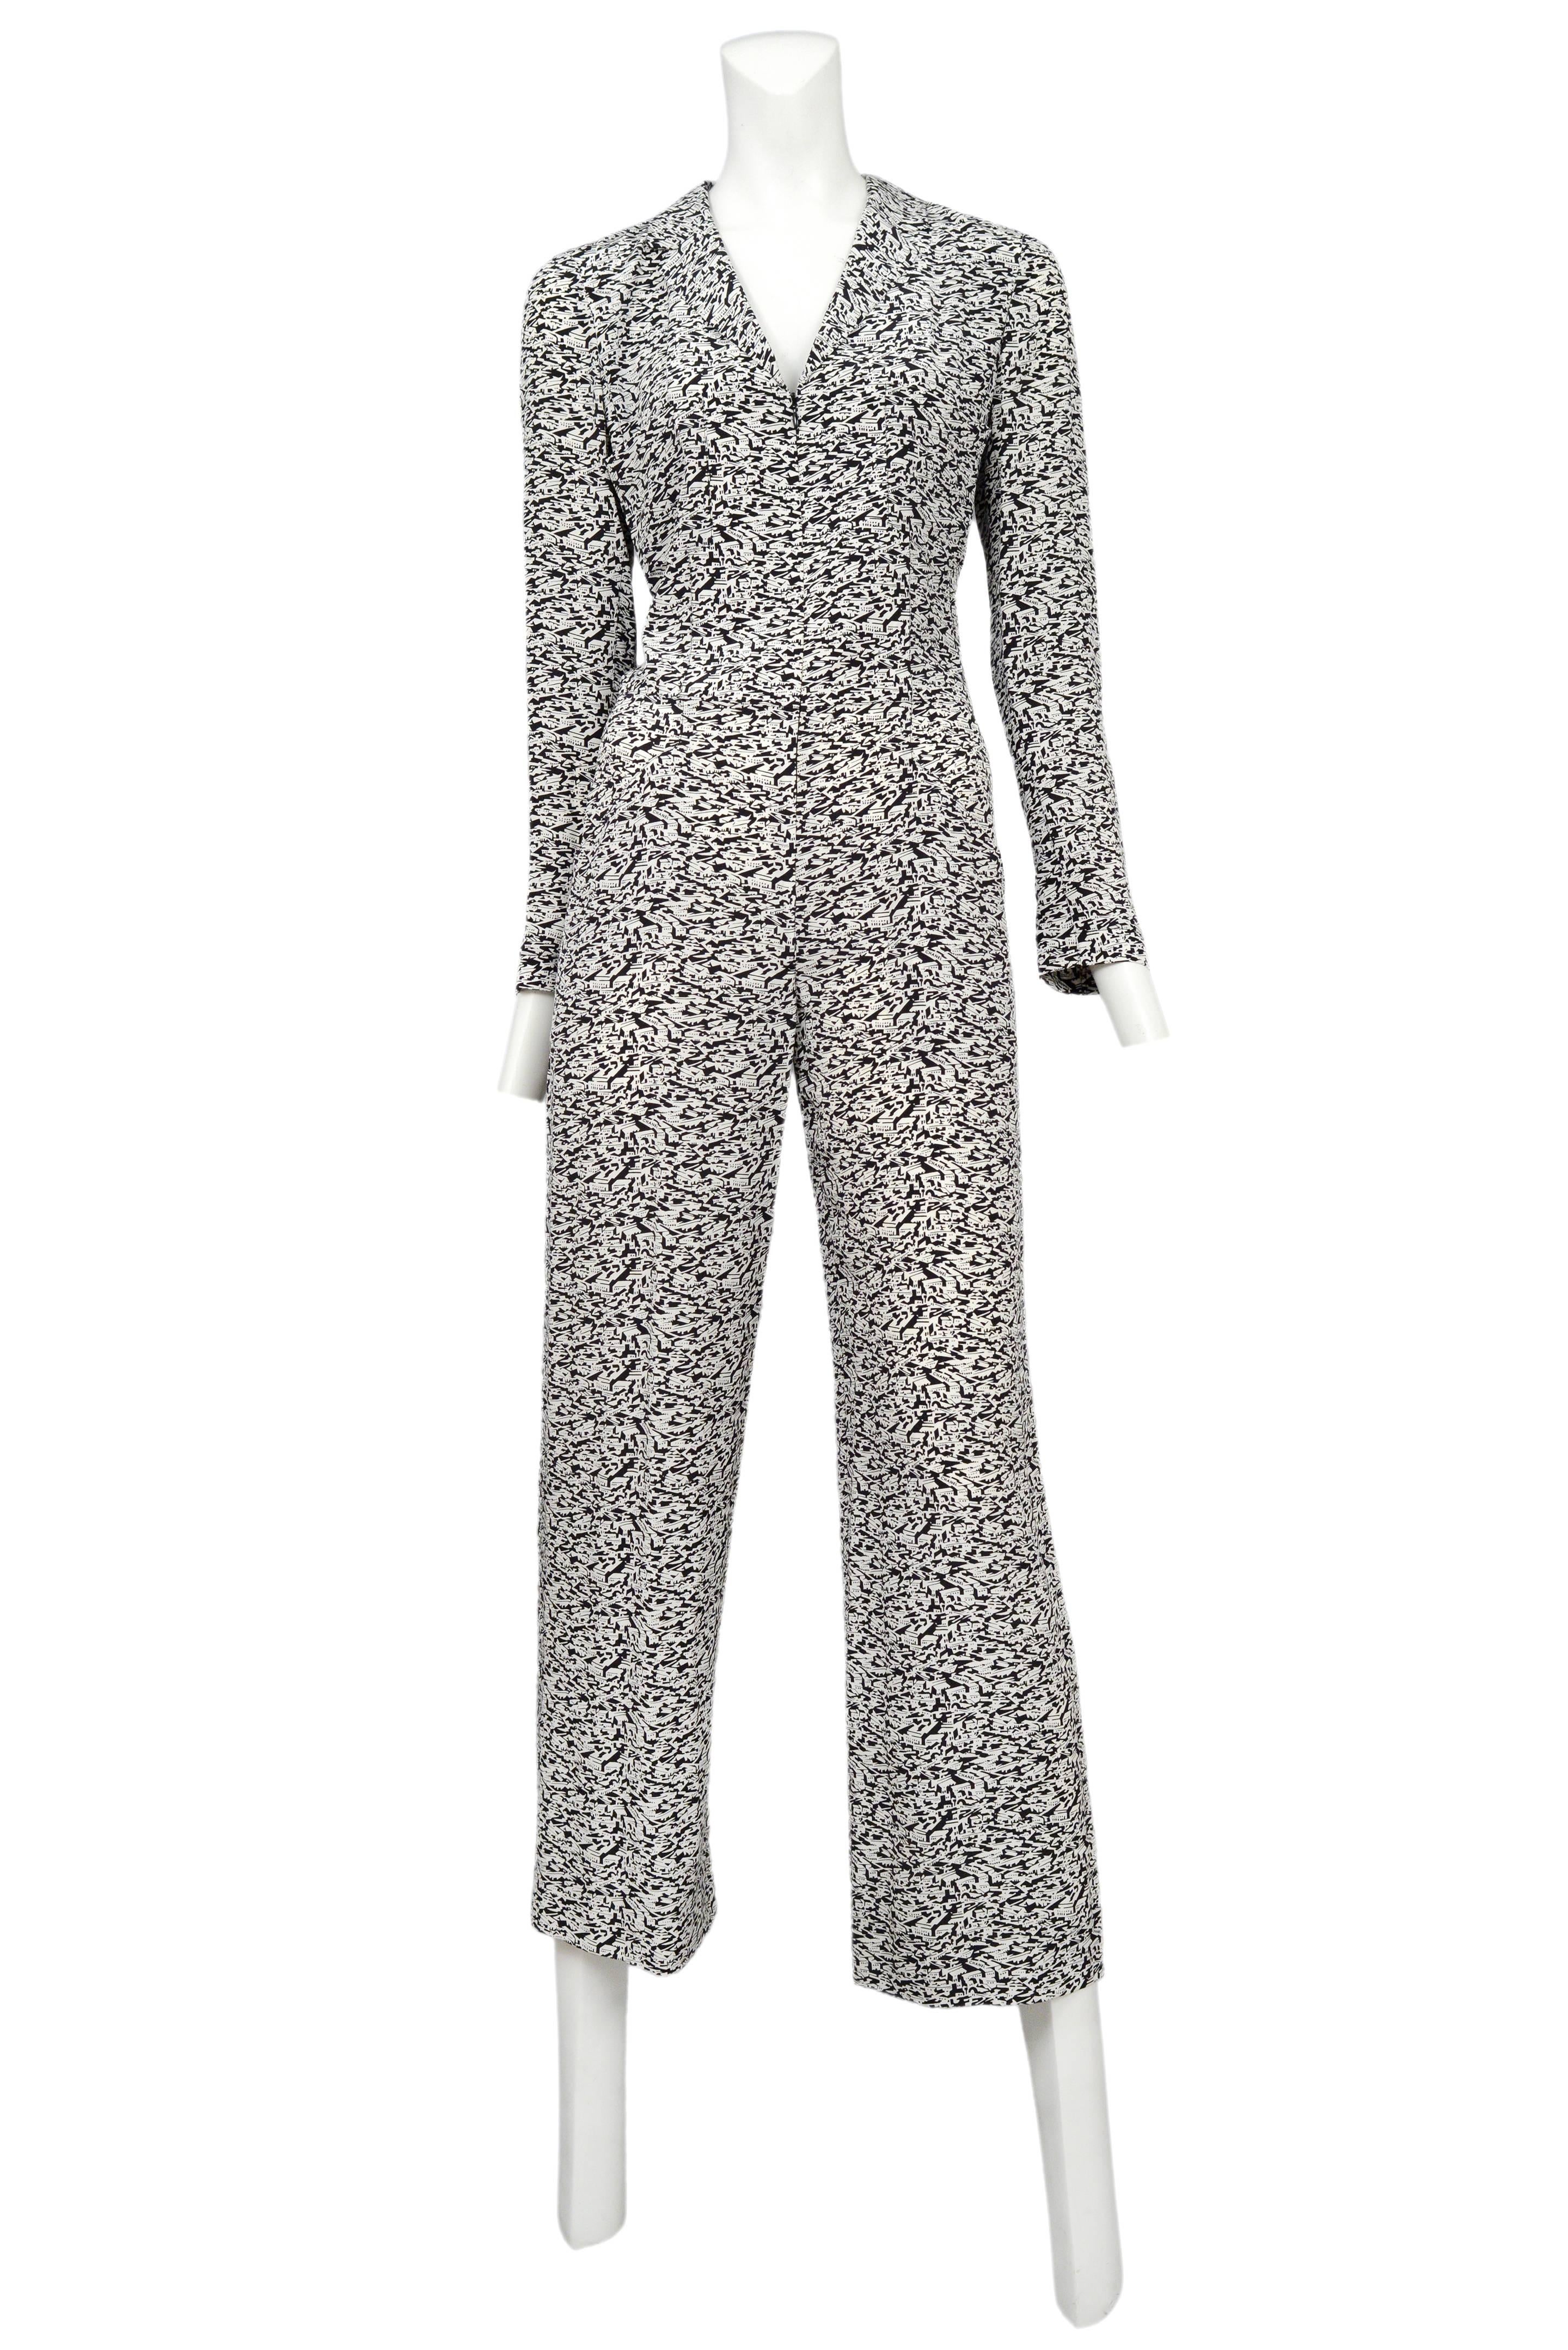 Vintage Chanel long sleeve jumpsuit featuring an allover black and white graphic city print.
Please inquire for additional images.